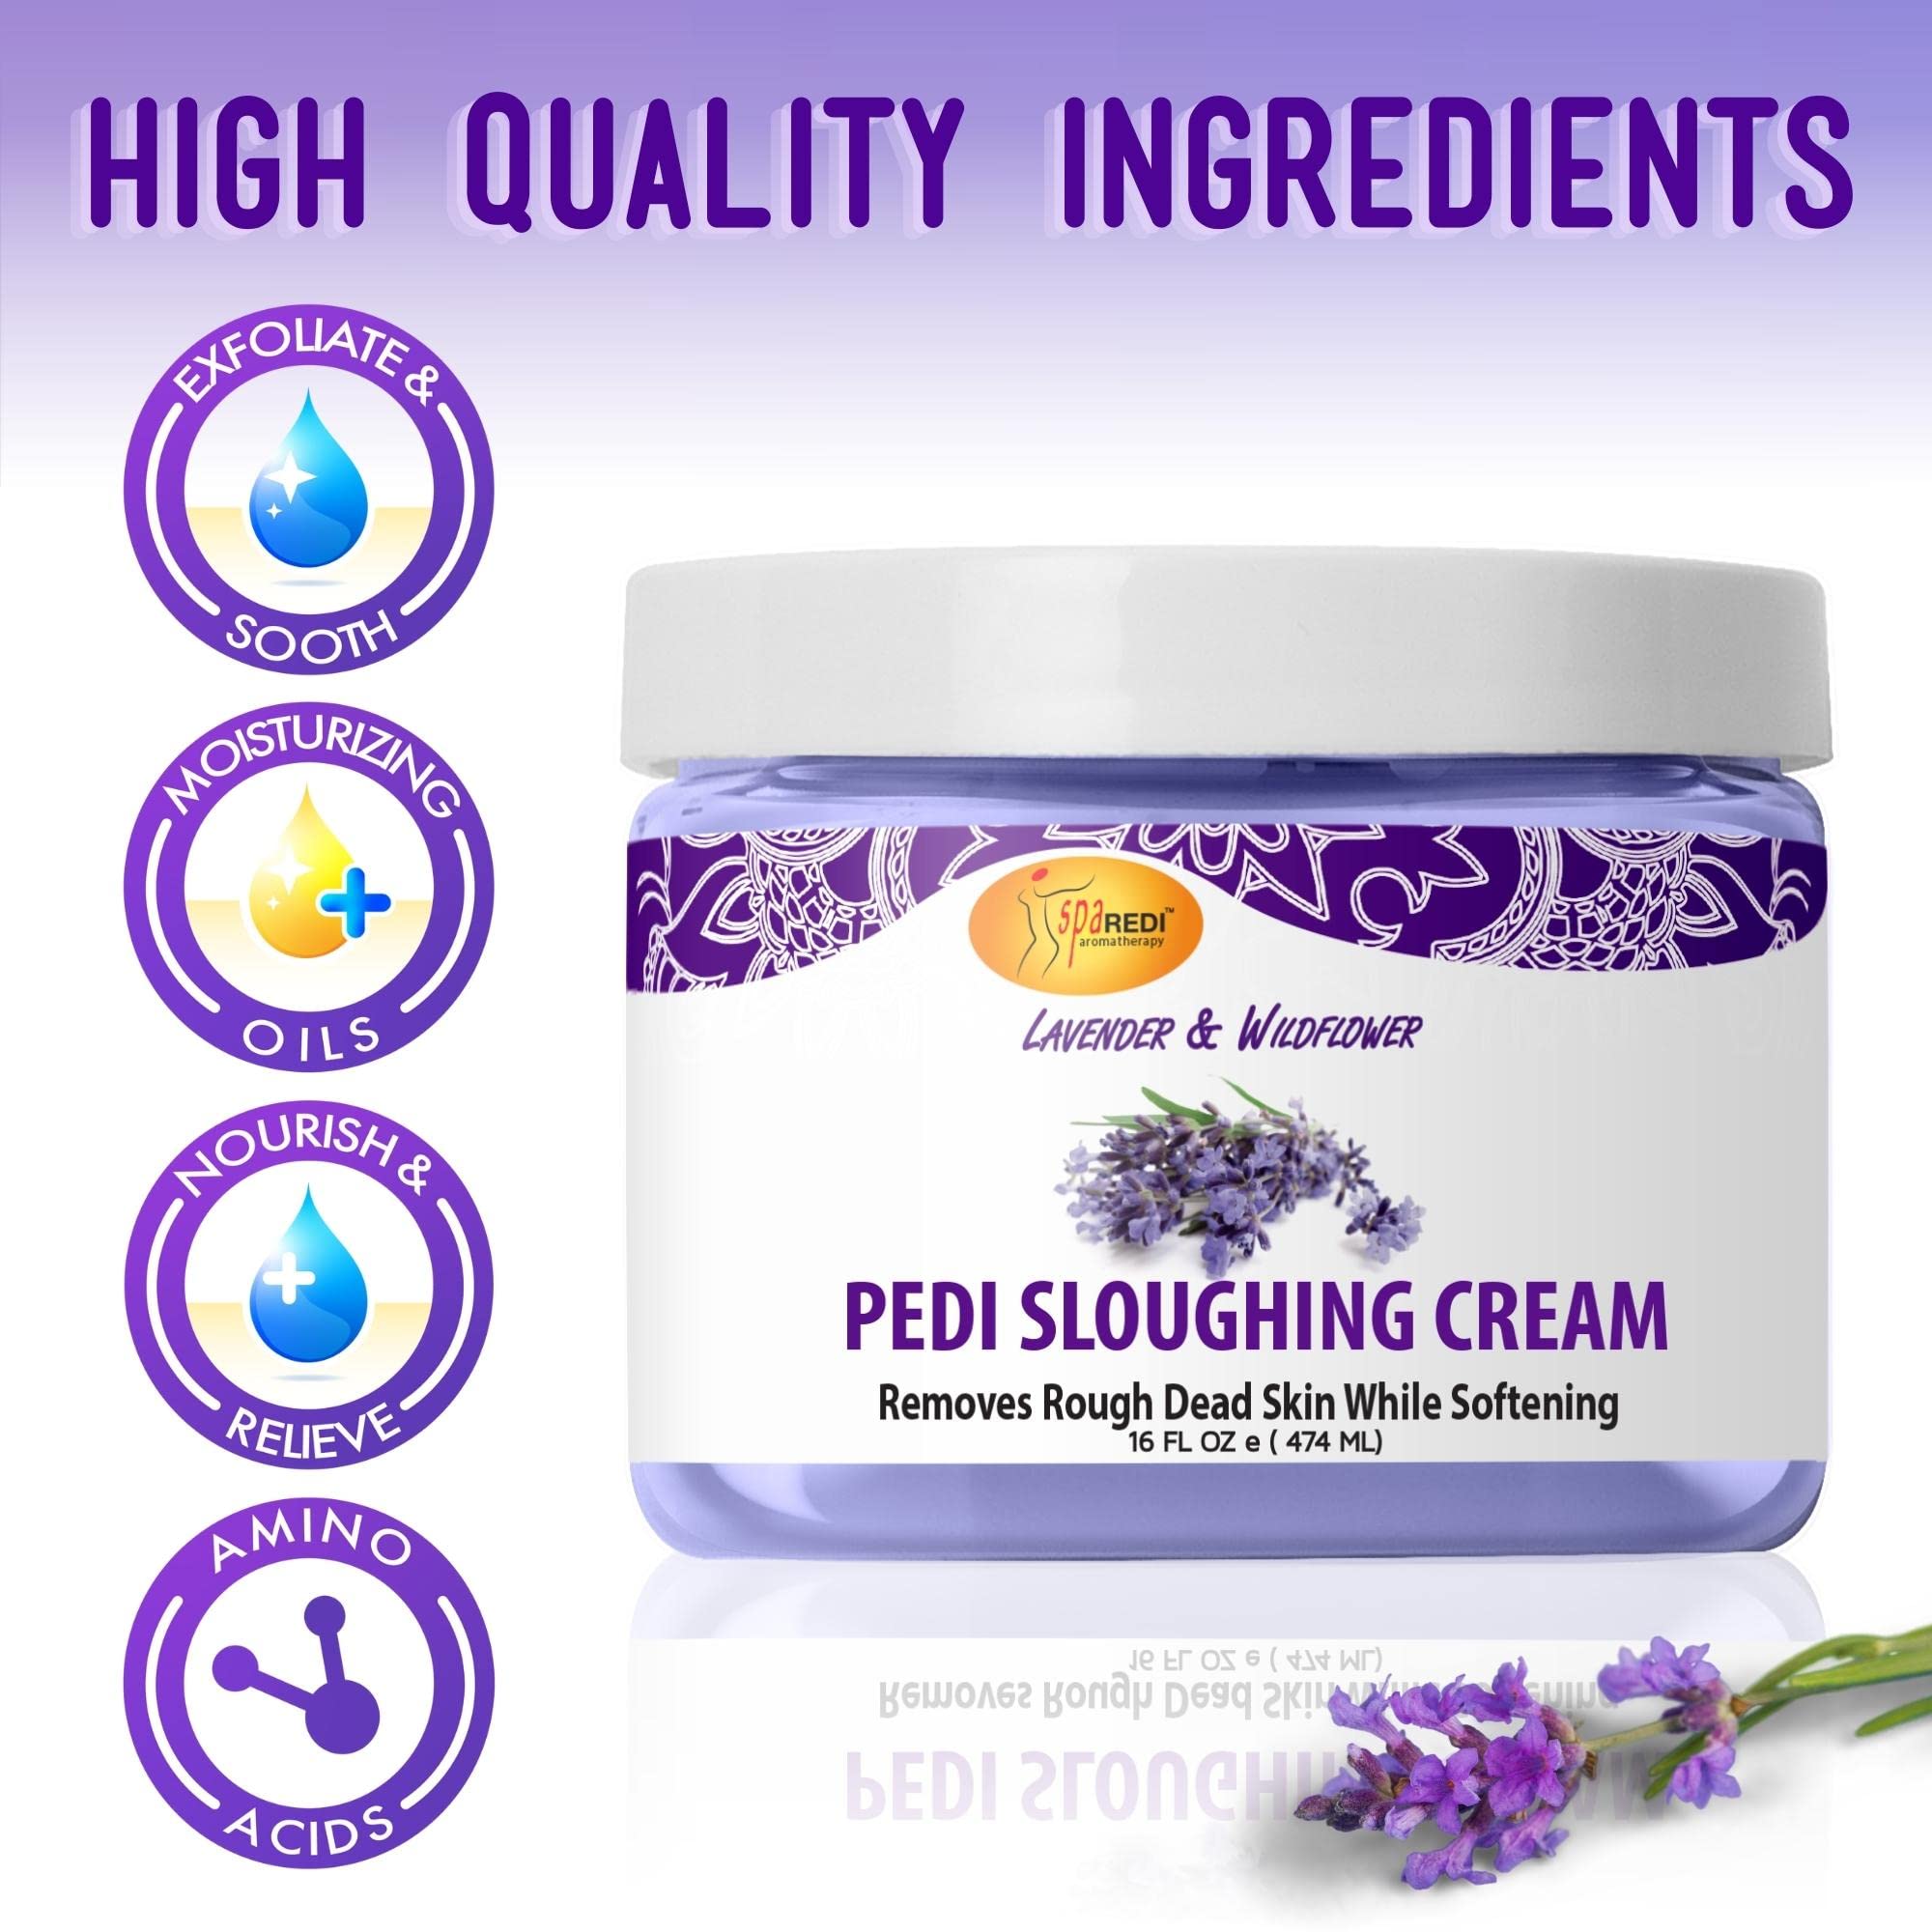 SPA REDI - Foot Cream, Sloughing Lotion, Lavender and Wildflower 16 Oz - Pedicure Massage Foot Care for Dry Cracked Feet, Scrub Gently, Exfoliating, Smooths and Eliminates Buildup of Dead Skin